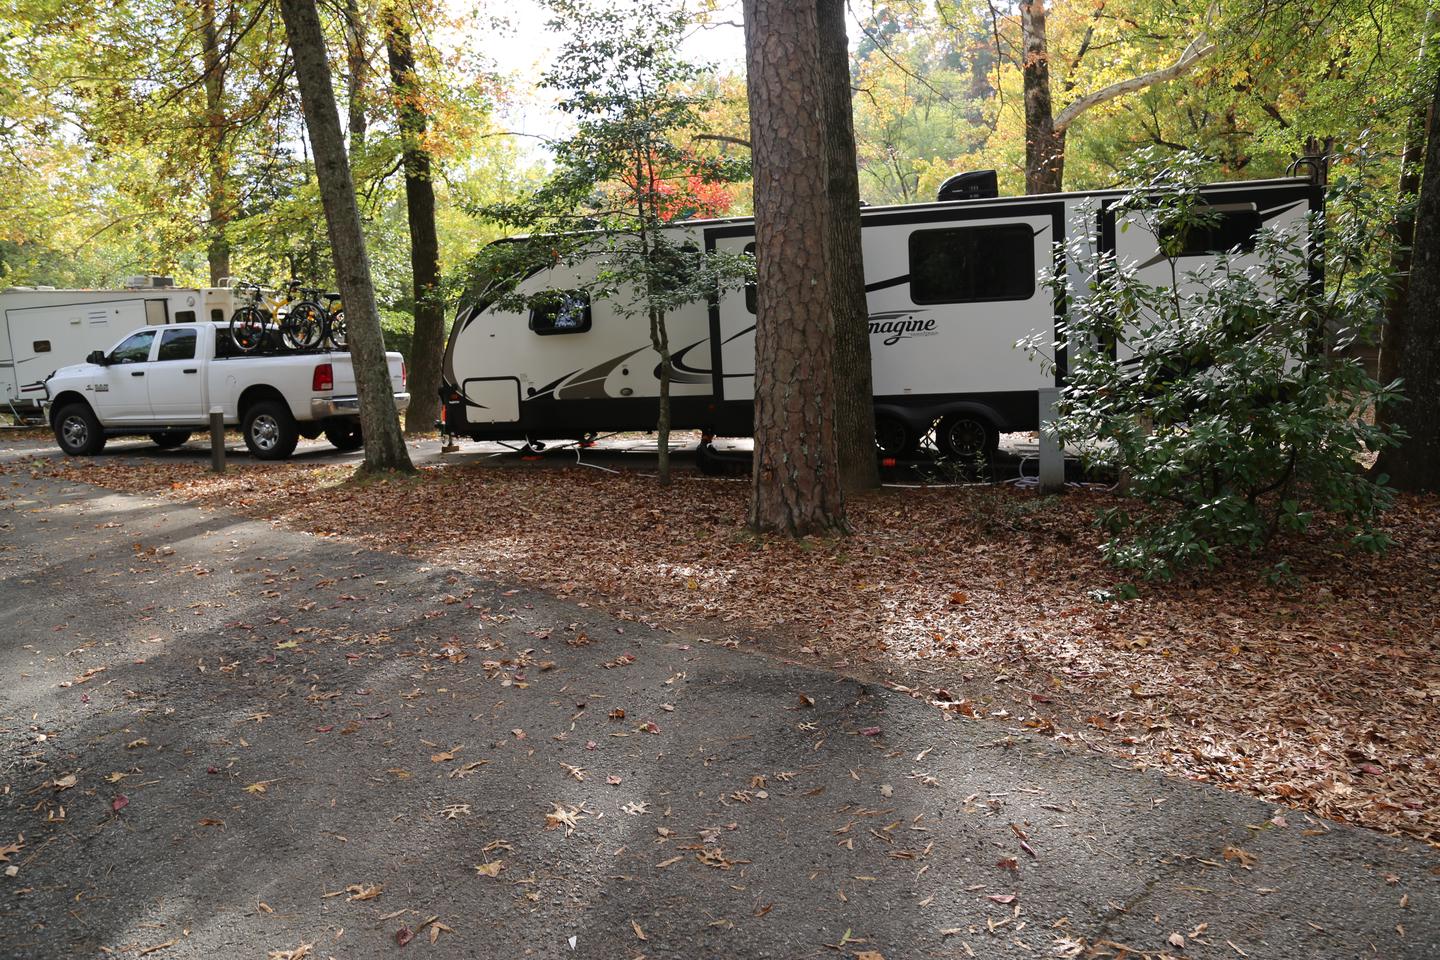 Large RV with full size truck backed in to campsite surrounded by trees and leaves on the ground.Campsite 13